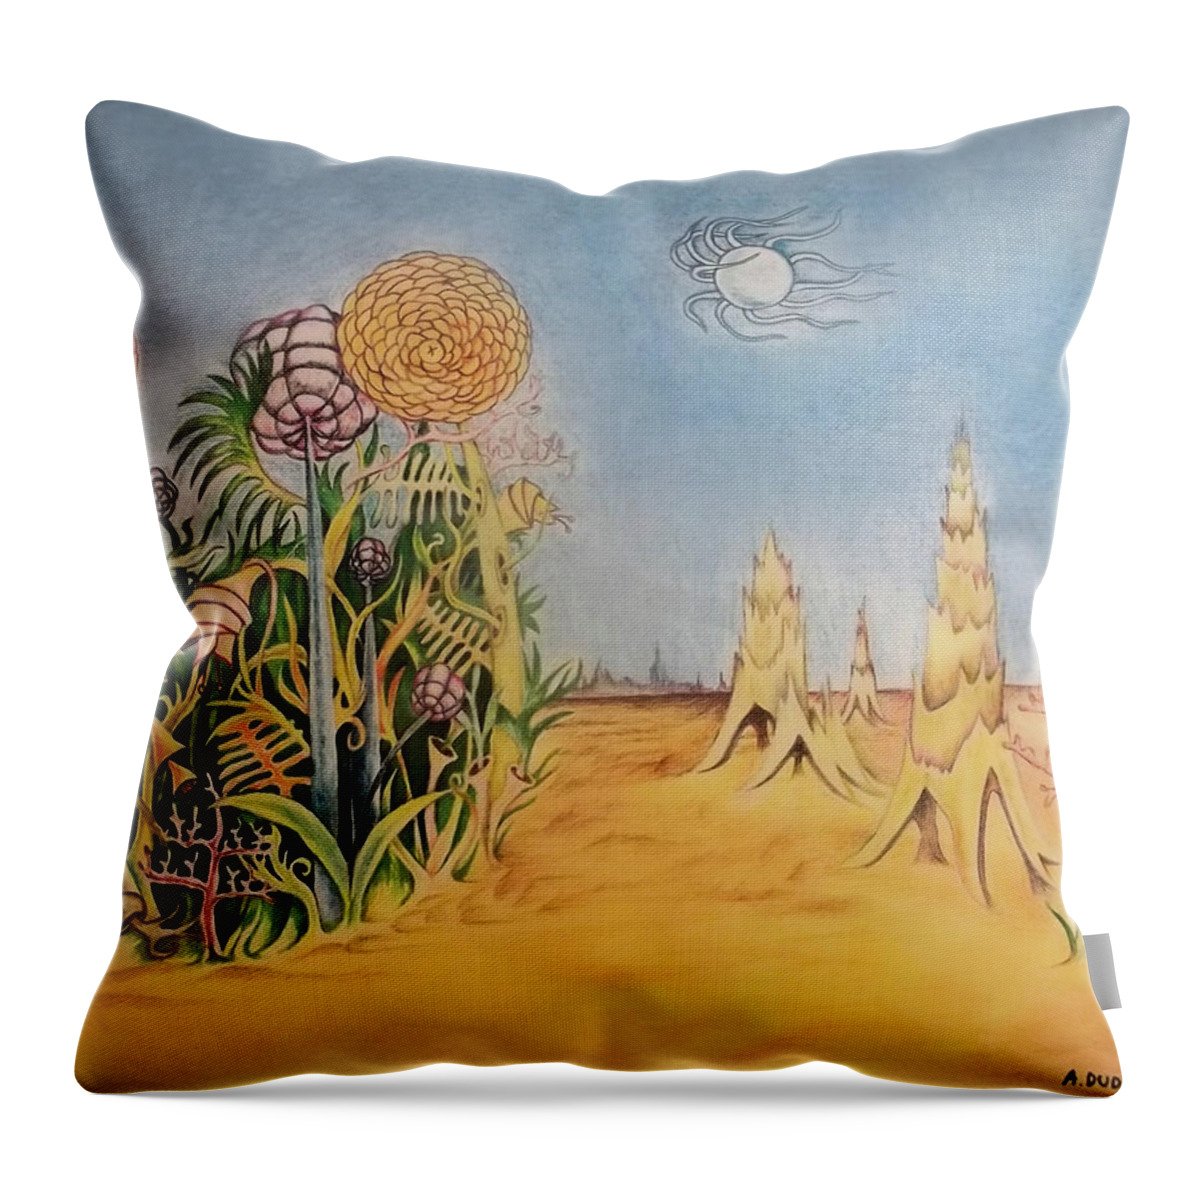  Fantastic Realm Throw Pillow featuring the painting Story land 2 by Alexander Dudchin